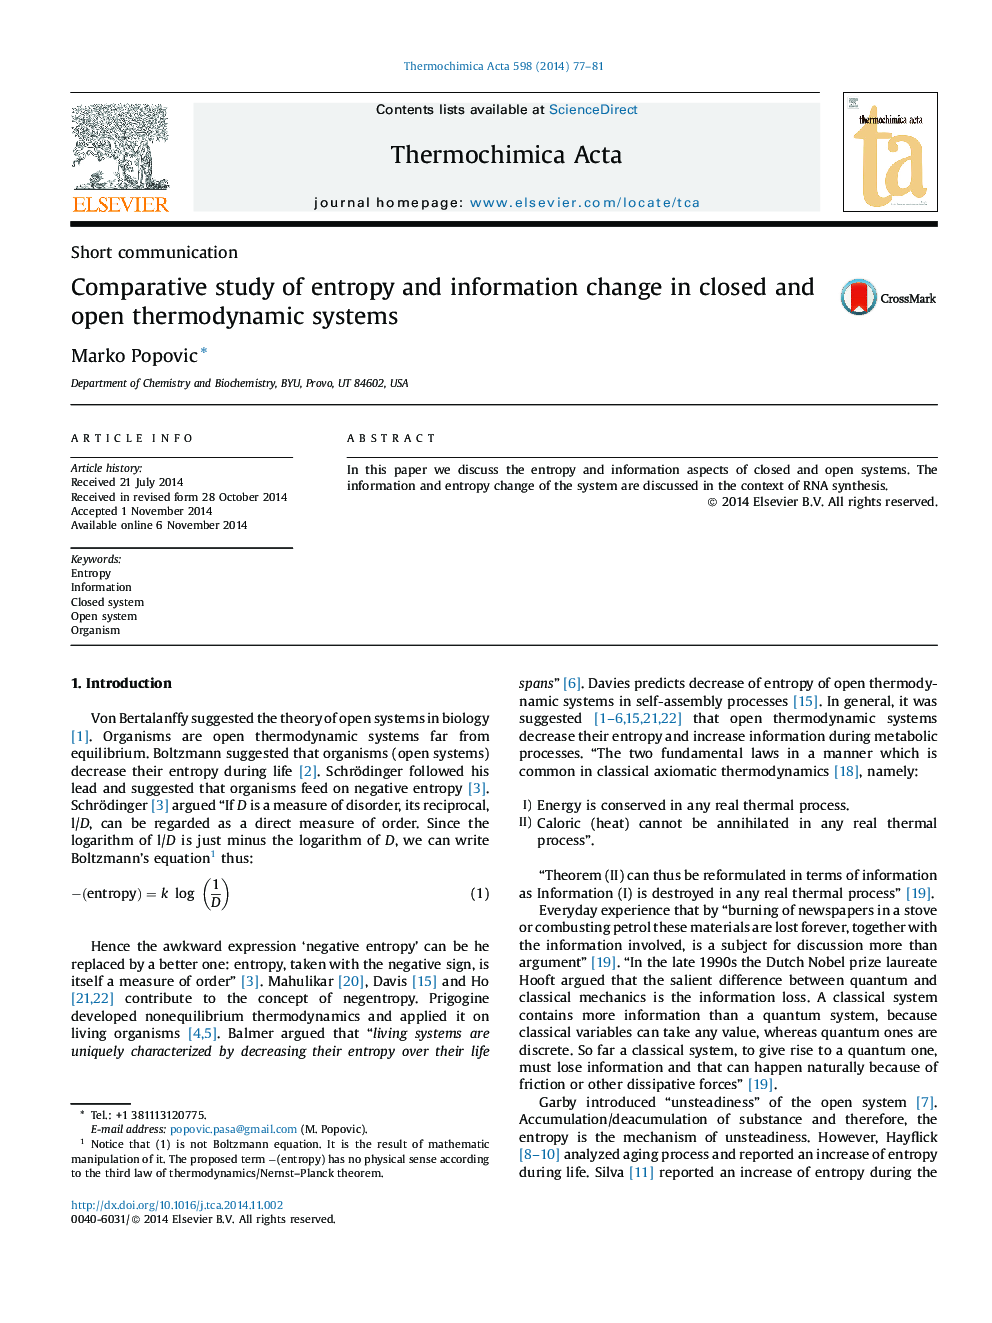 Comparative study of entropy and information change in closed and open thermodynamic systems